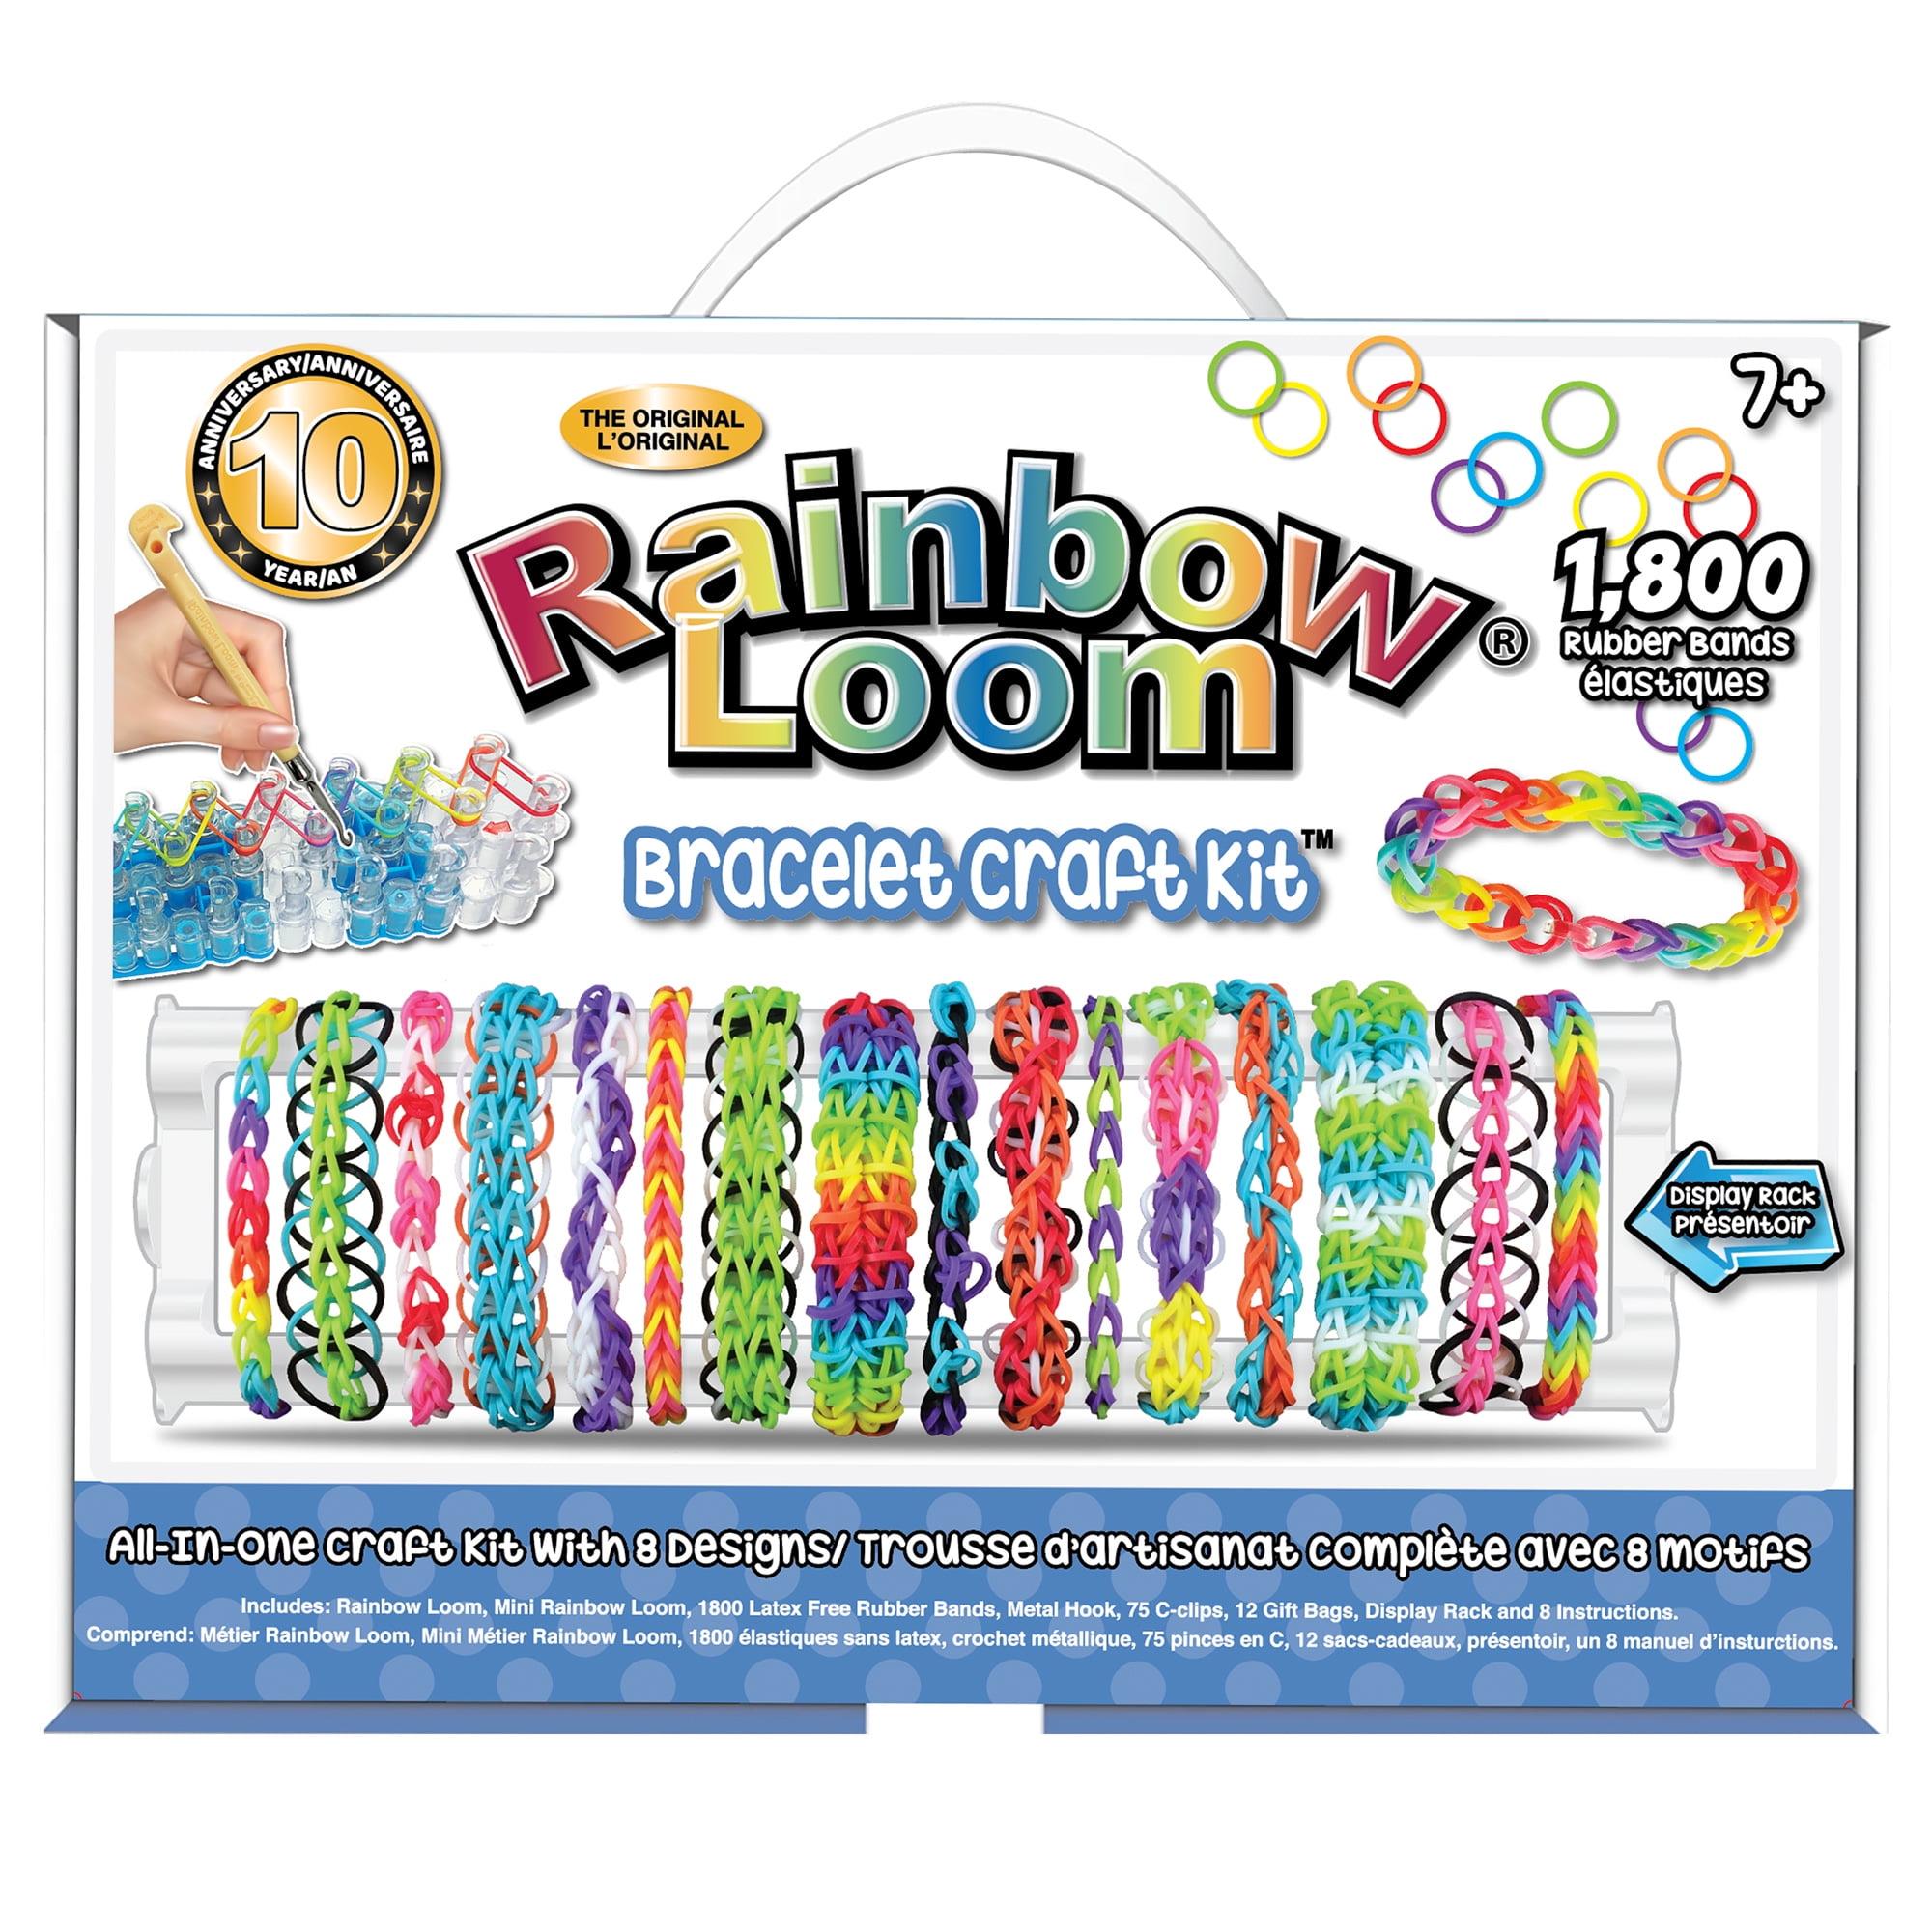 Leeuw Kast goud Rainbow Loom- Rubber Band Bracelet Craft Kit, 1,800 Rubber Bands Included,  8 Different Designs to Create, 5 Compartments For Easy Storage, High  Quality Craft for Ages 7 and Up - Walmart.com